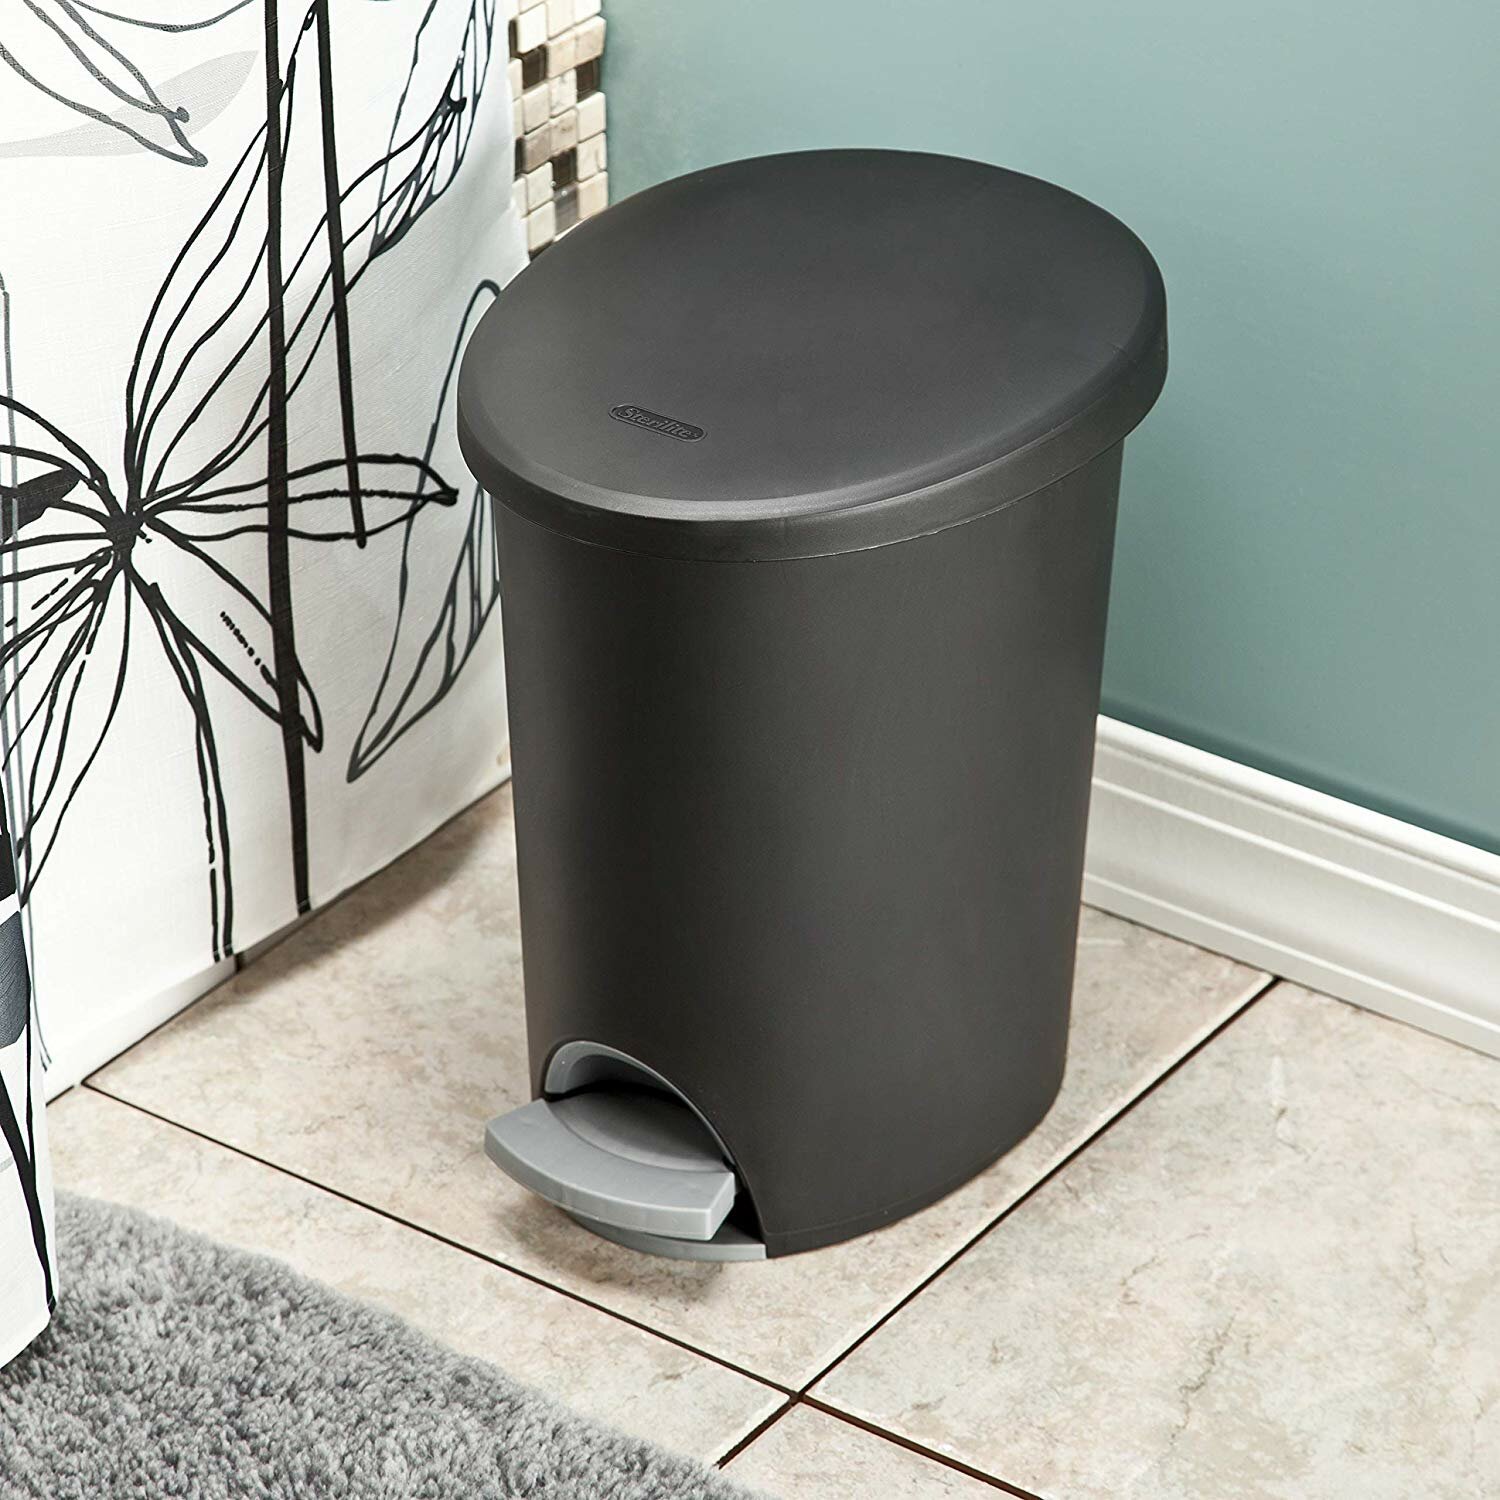 Better Homes & Gardens 1.3 Gallon Trash Can, Oval Bathroom Trash Can,  Stainless Steel